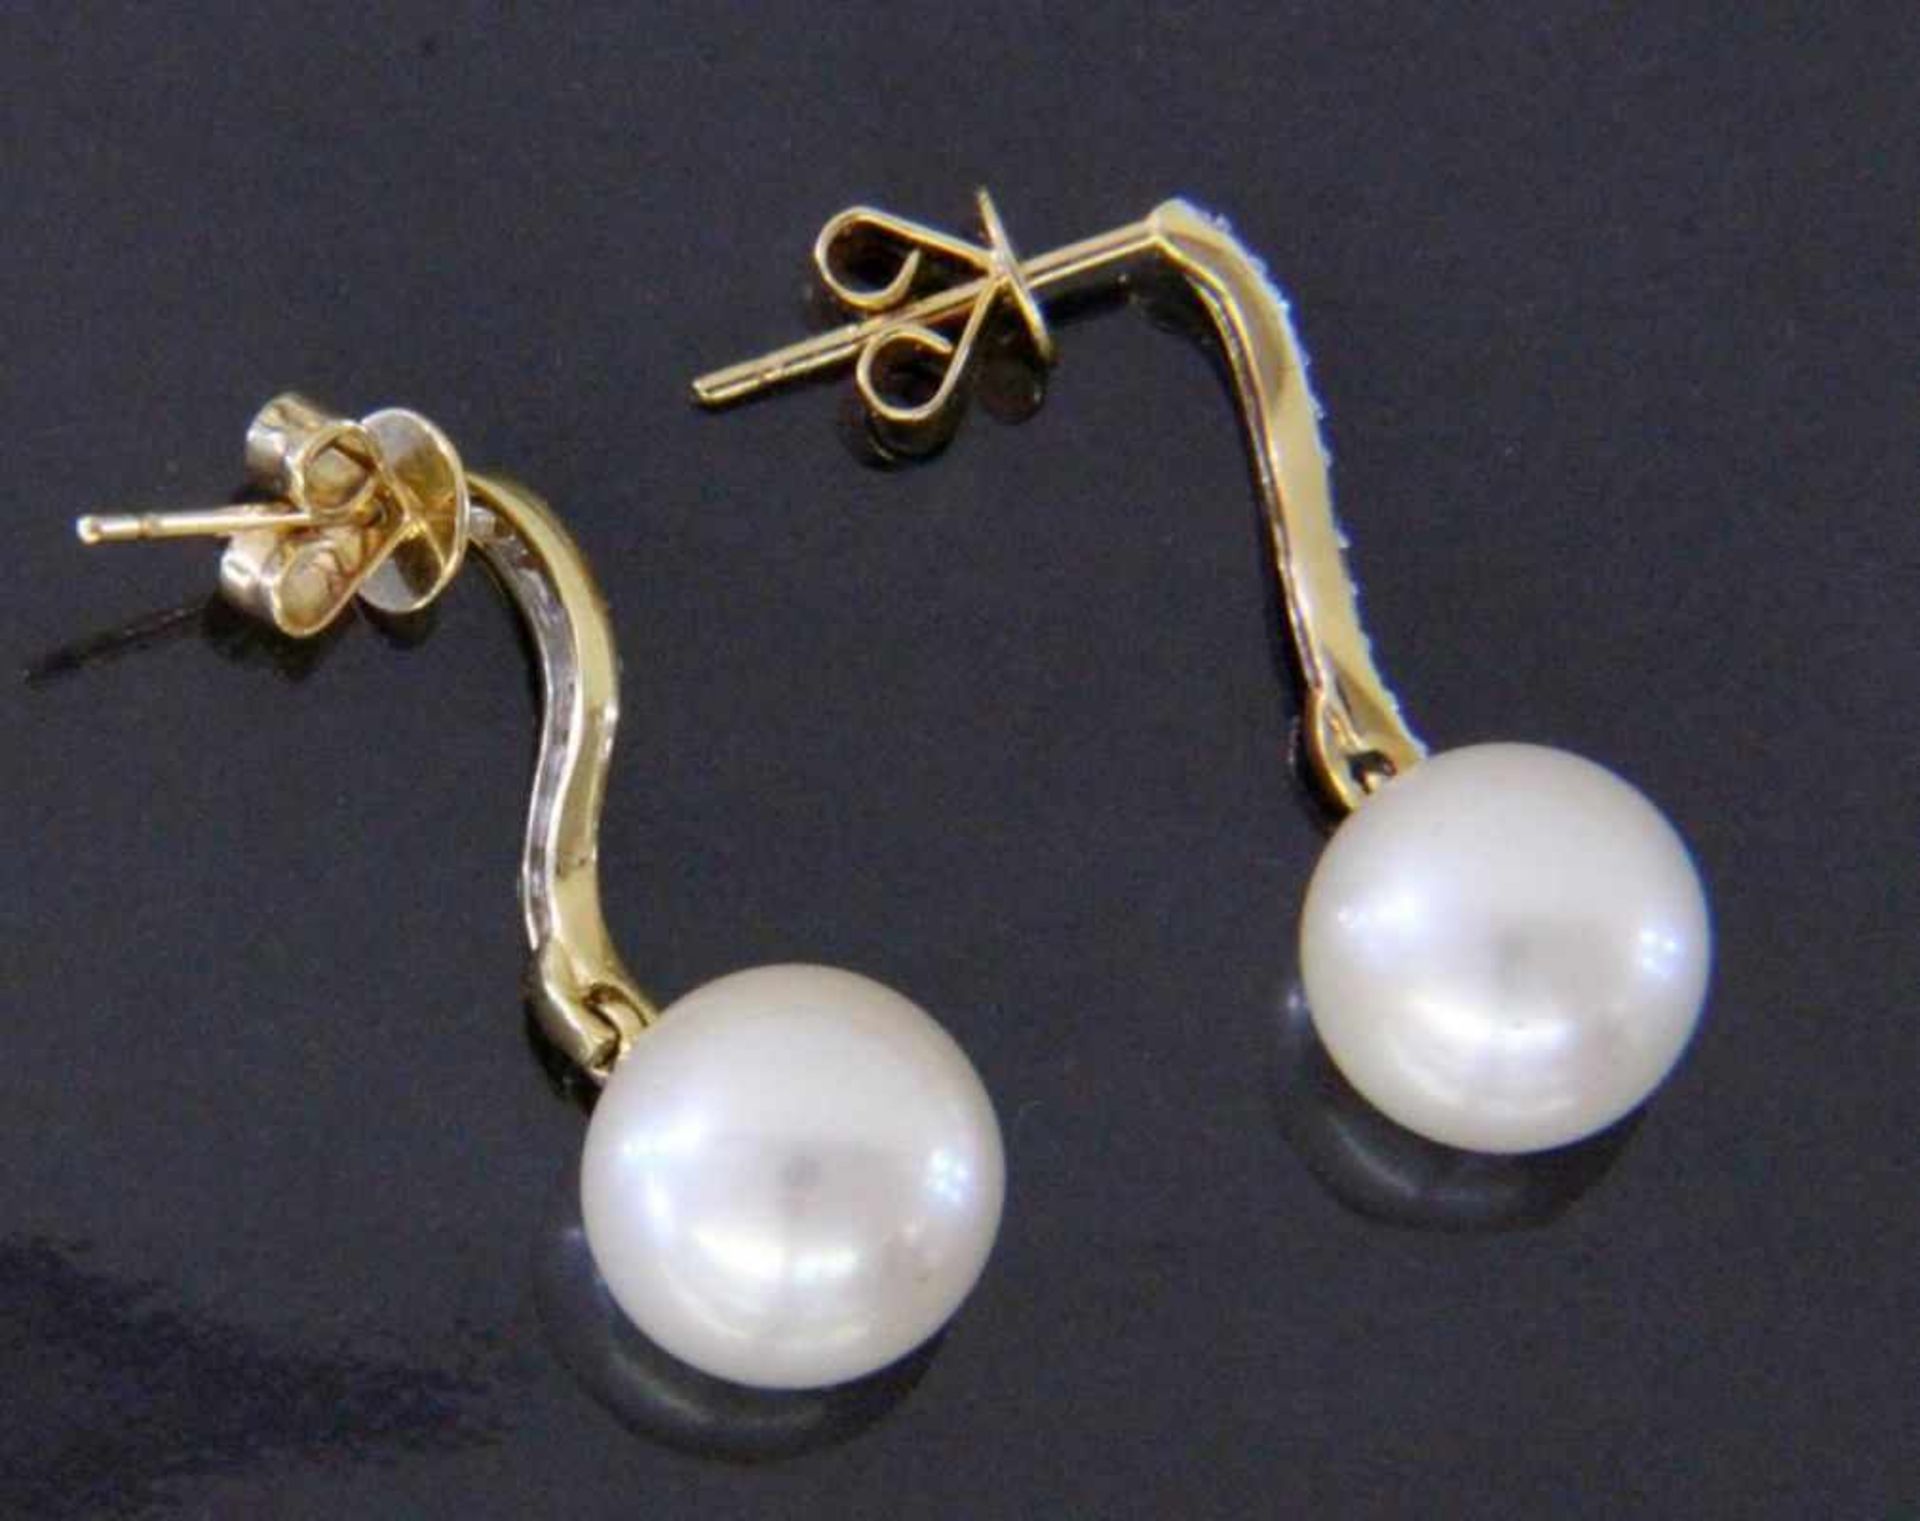 A PAIR OF STUD EARRINGS 585/000 yellow gold with pearl and brilliant cut diamonds.